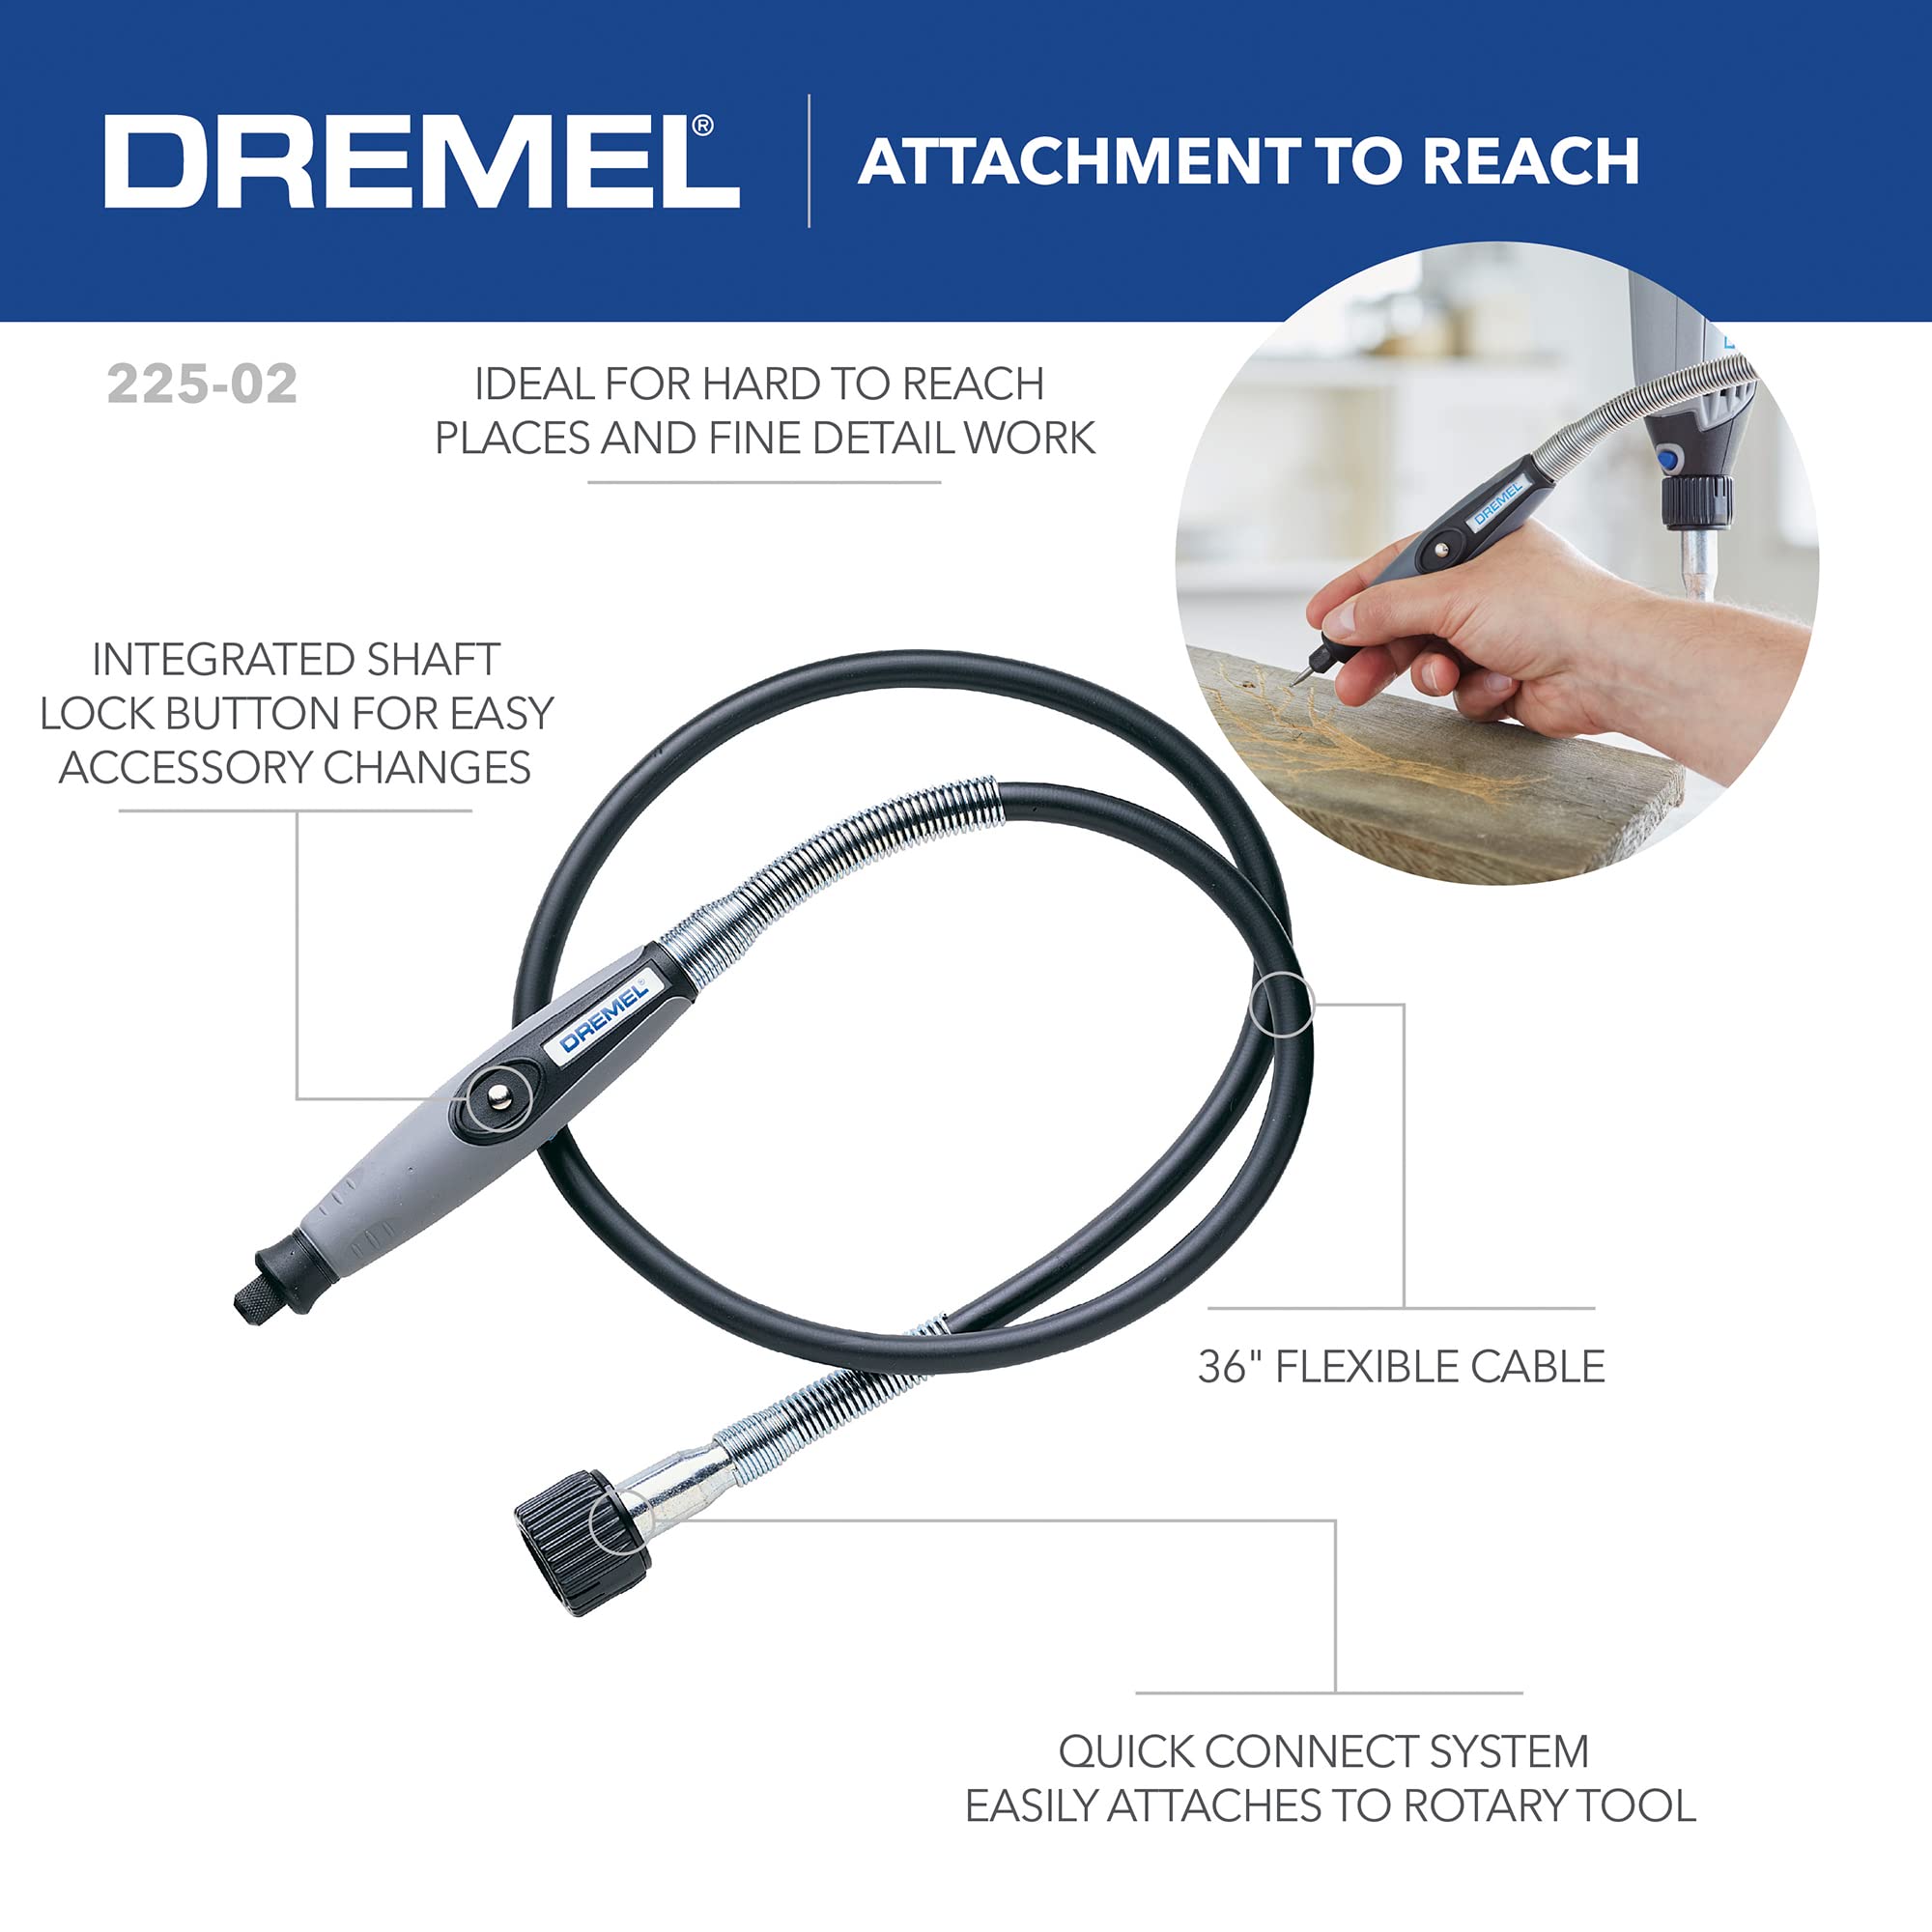 Dremel 575 Right Angle Attachment for Rotary Tool with Flex Shaft Rotary Tool Attachment with Comfort Grip and 36” Long Cable